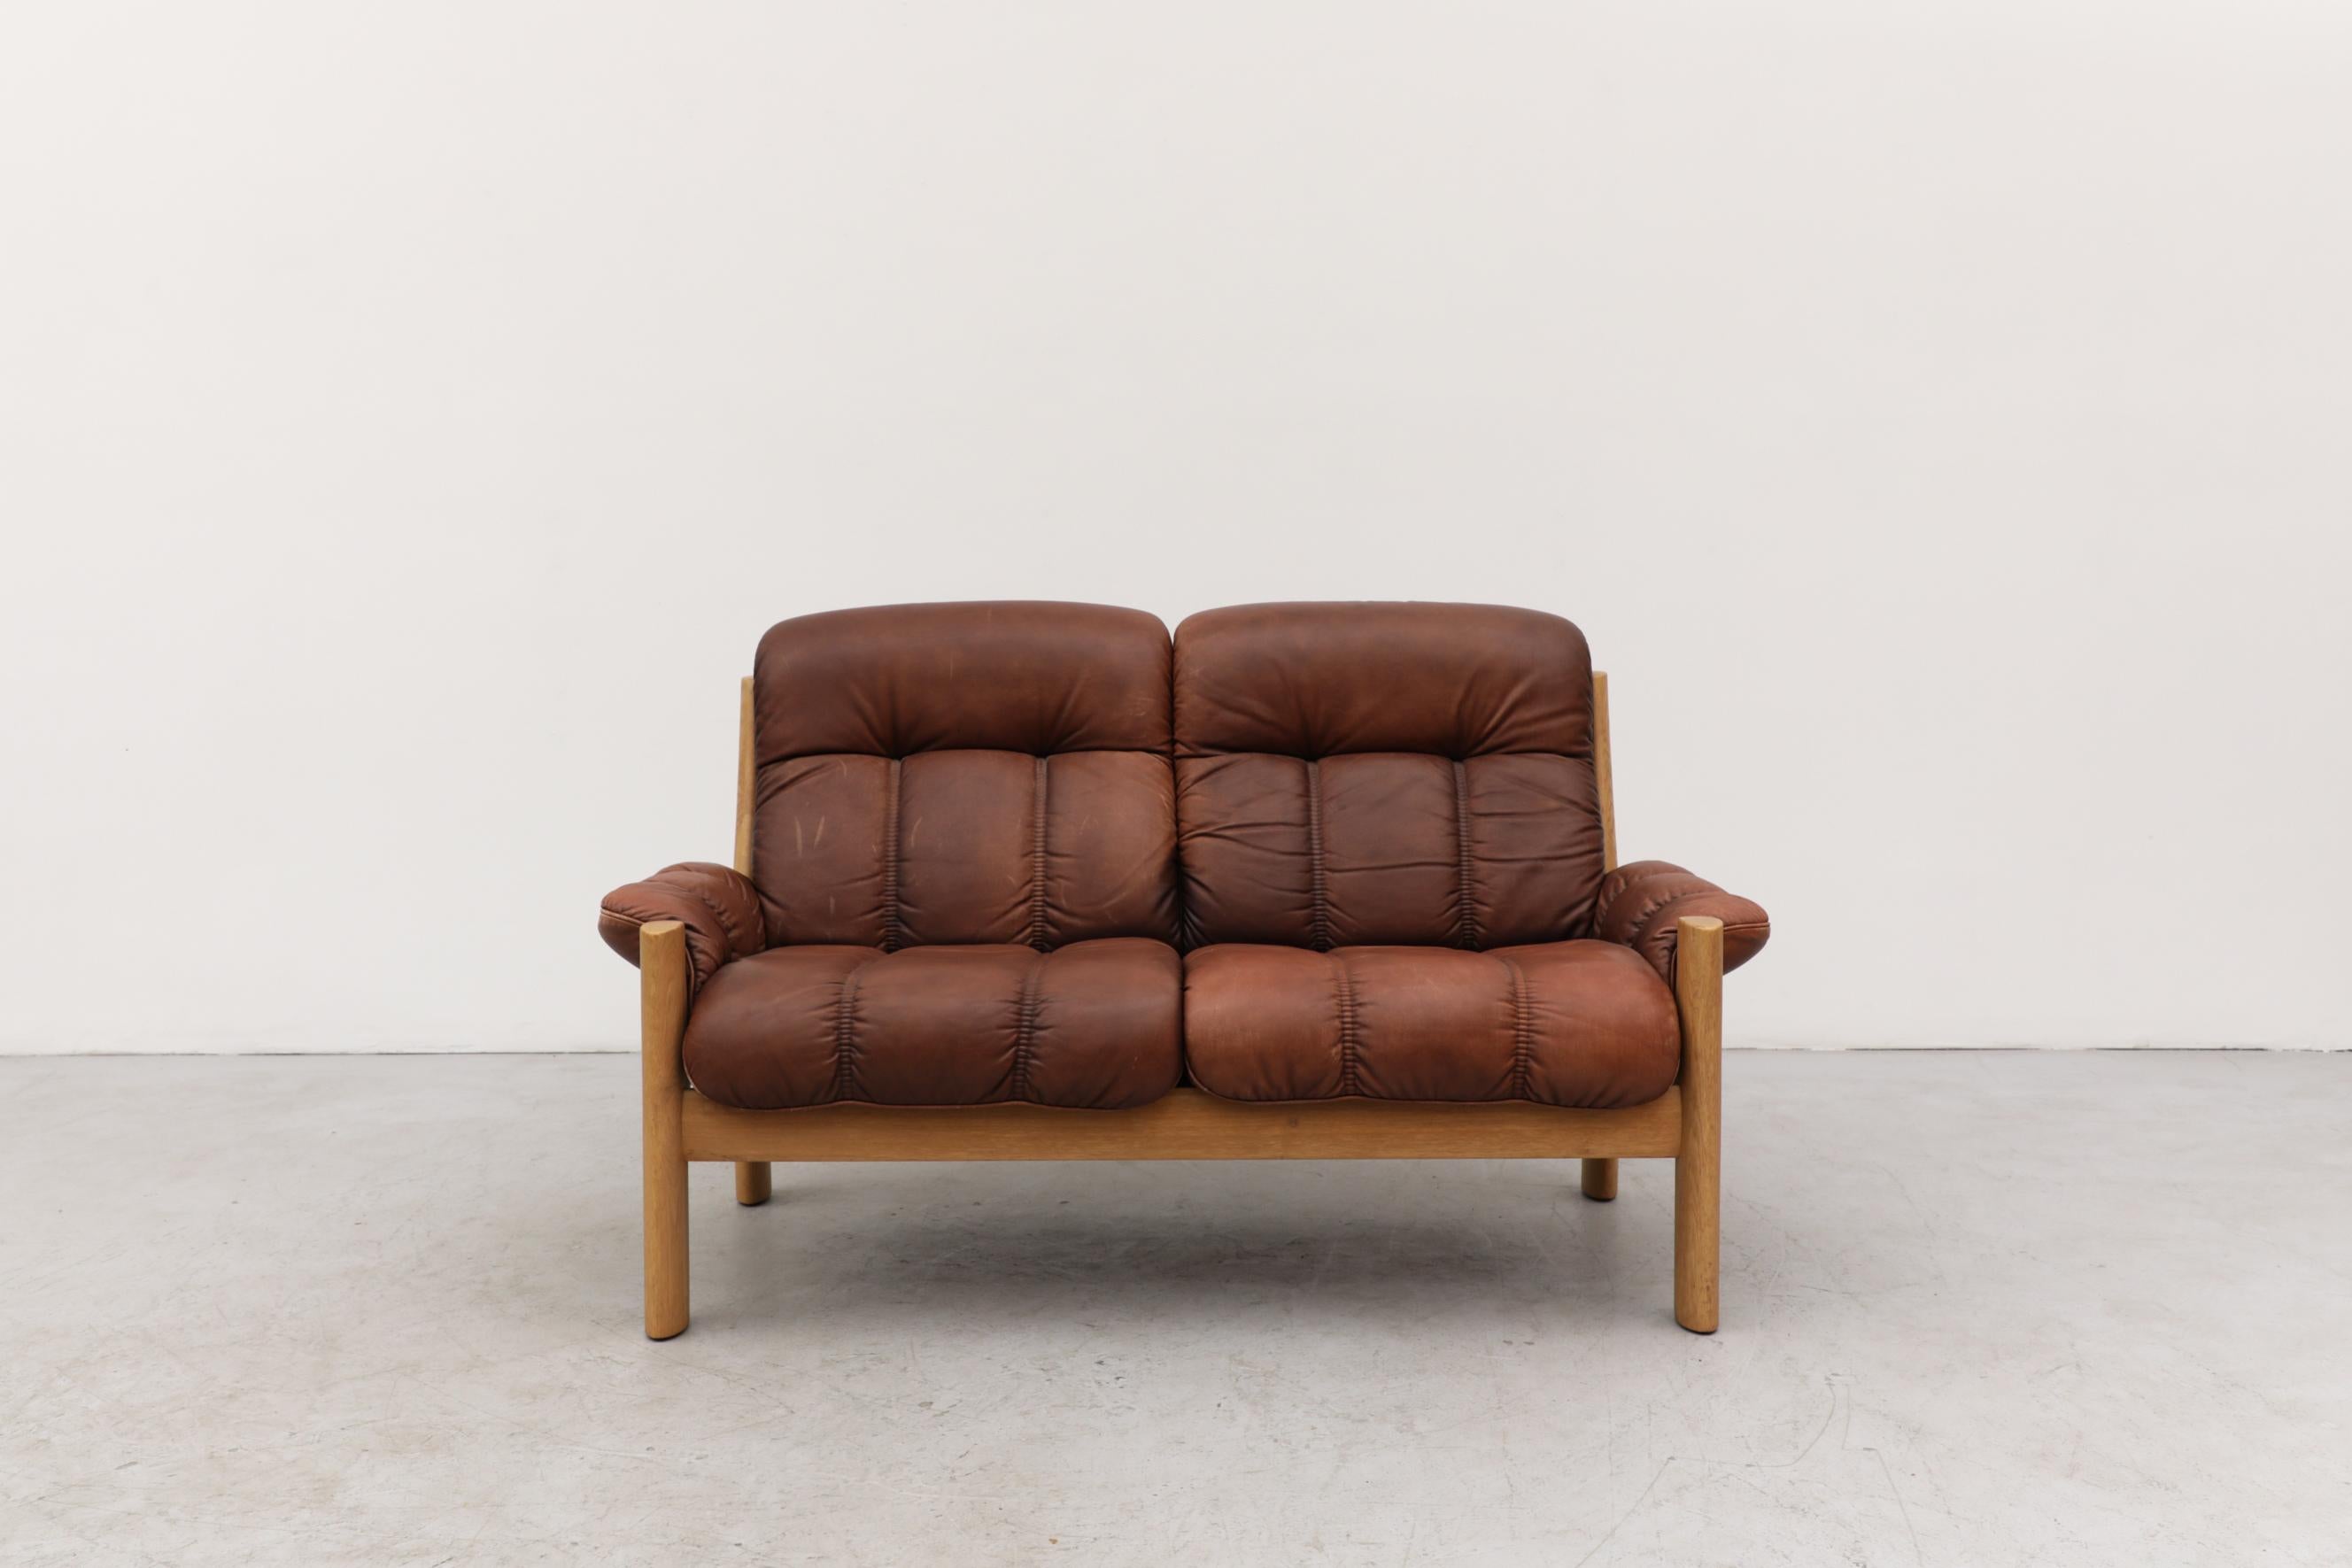 Tufted leather and oak loveseat with a visible patina by Finnish design company, Asko. The leather is in original condition and has some scratching and wear that is consistent with its age and use. An Asko lounge chair, sofa